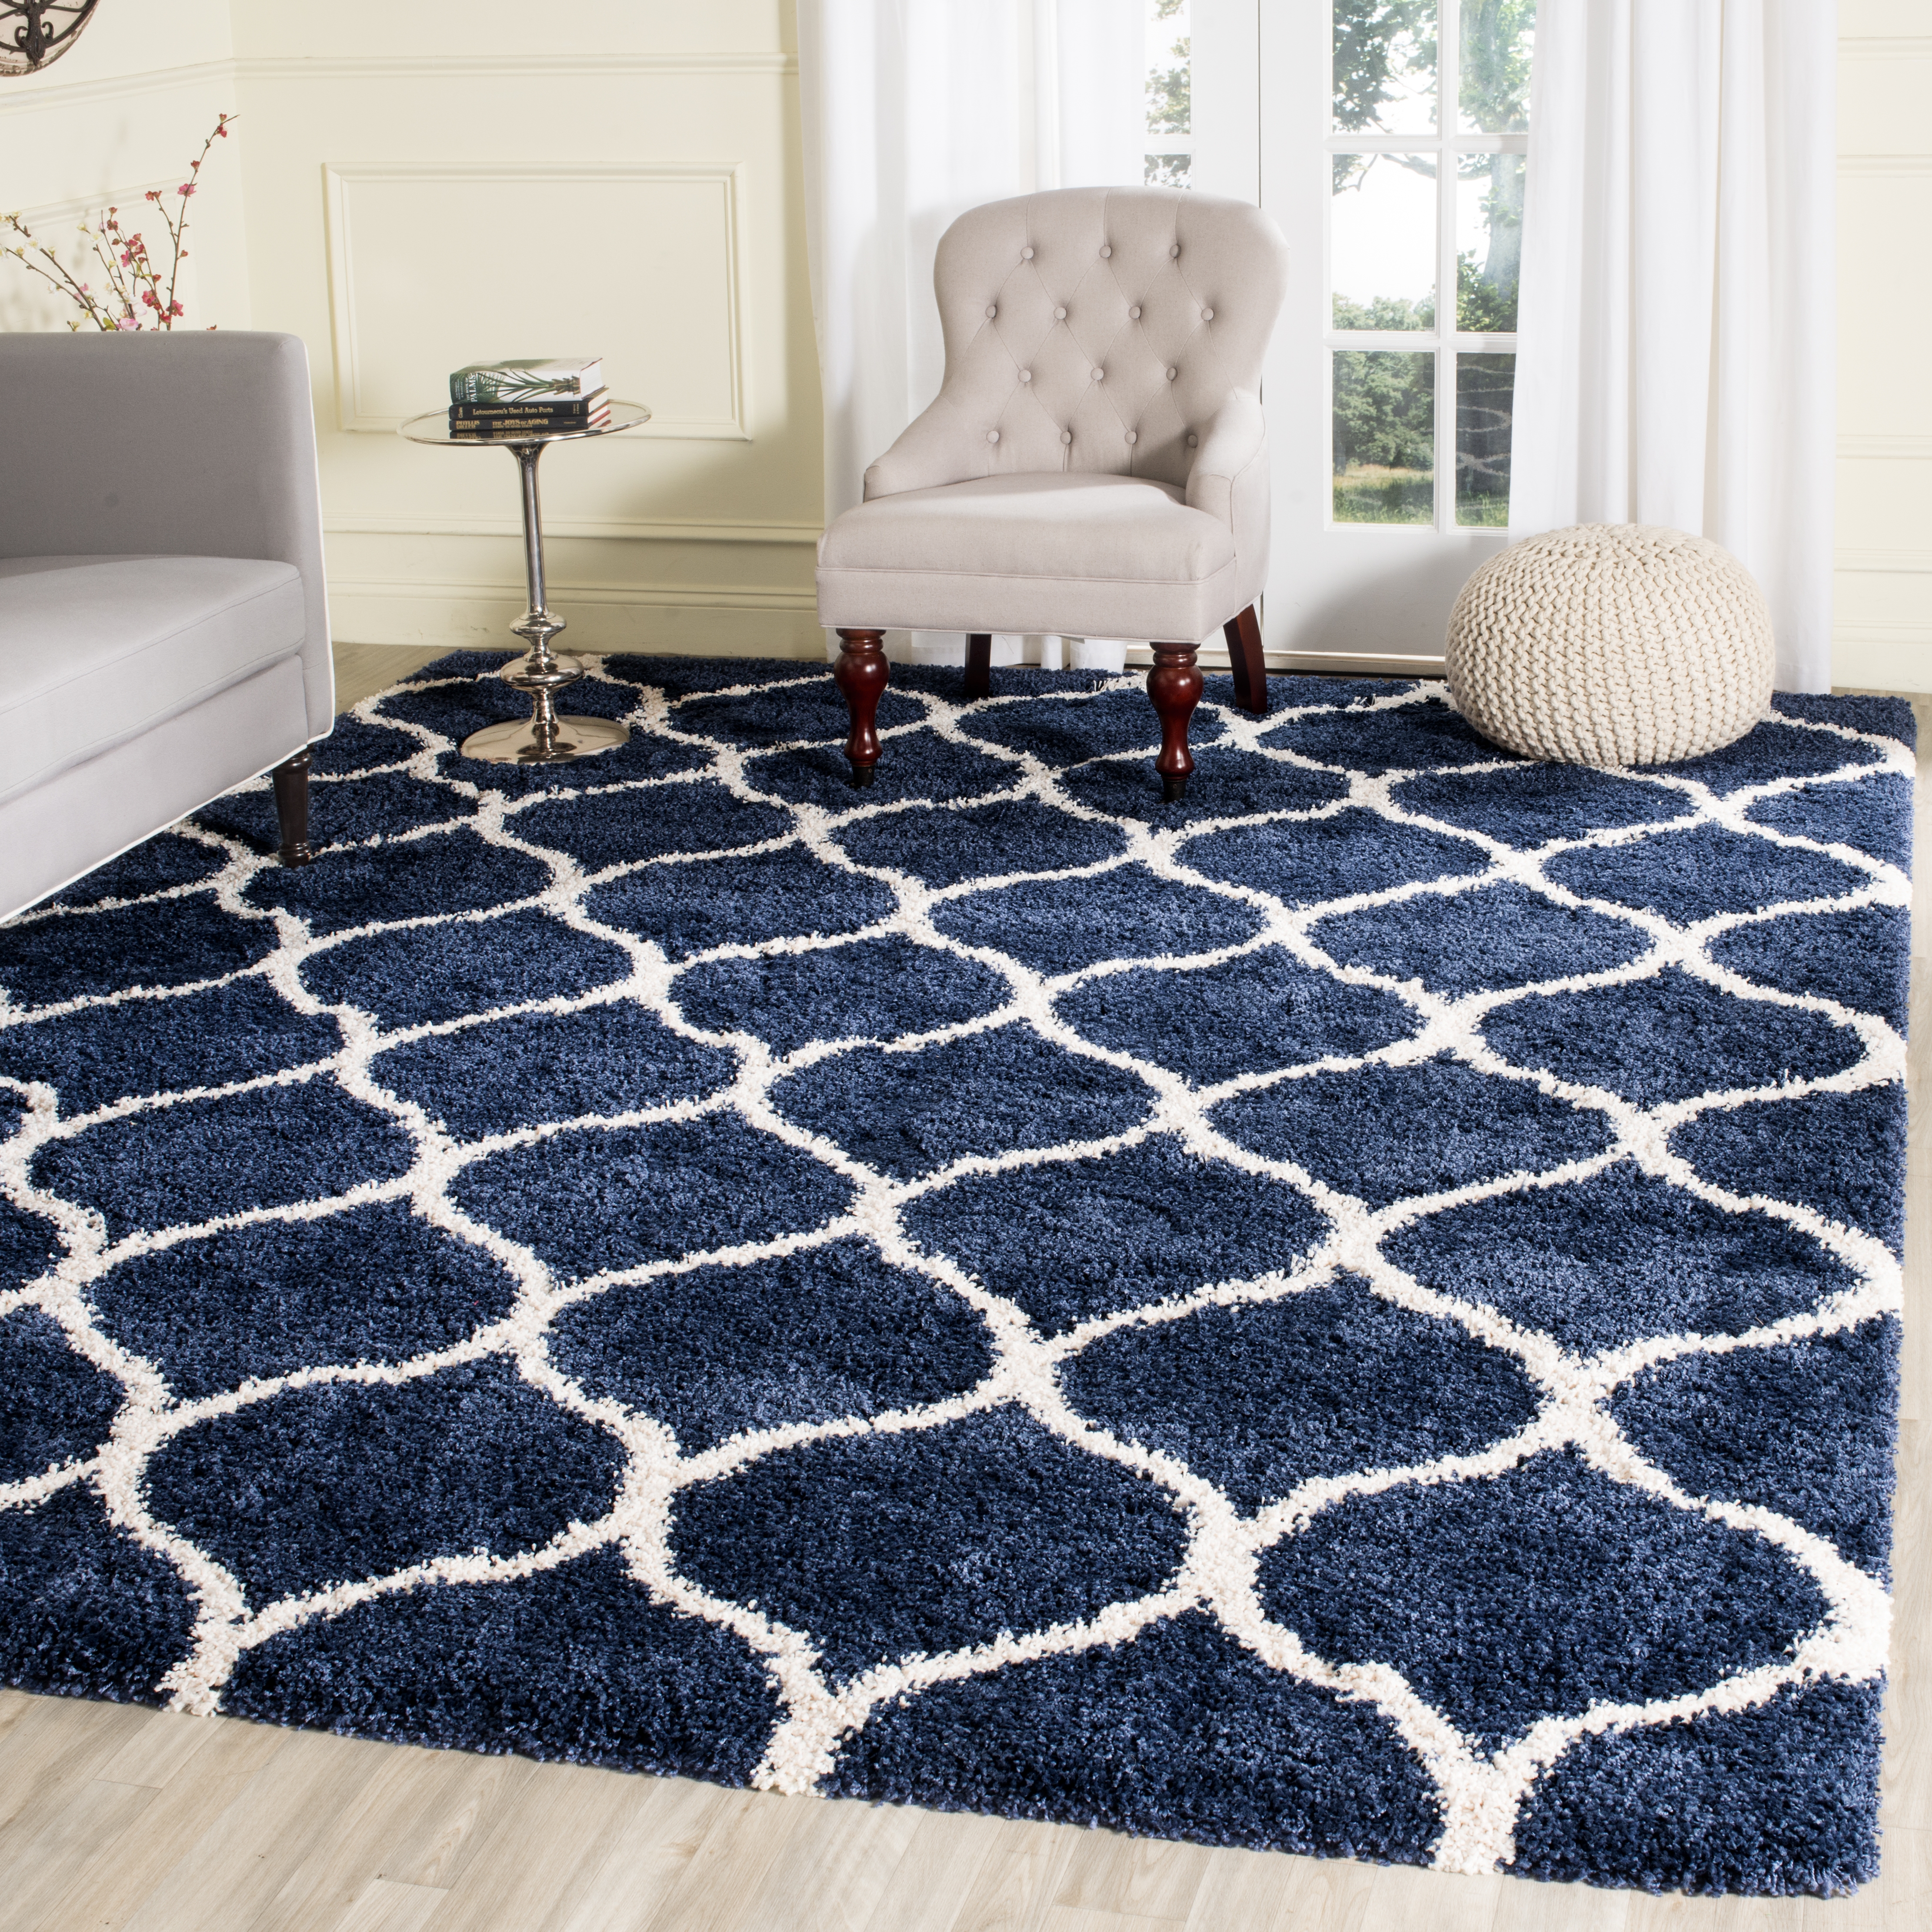 Arlo Home Woven Area Rug, SGH280C, Navy/Ivory,  9' X 12' - Image 1